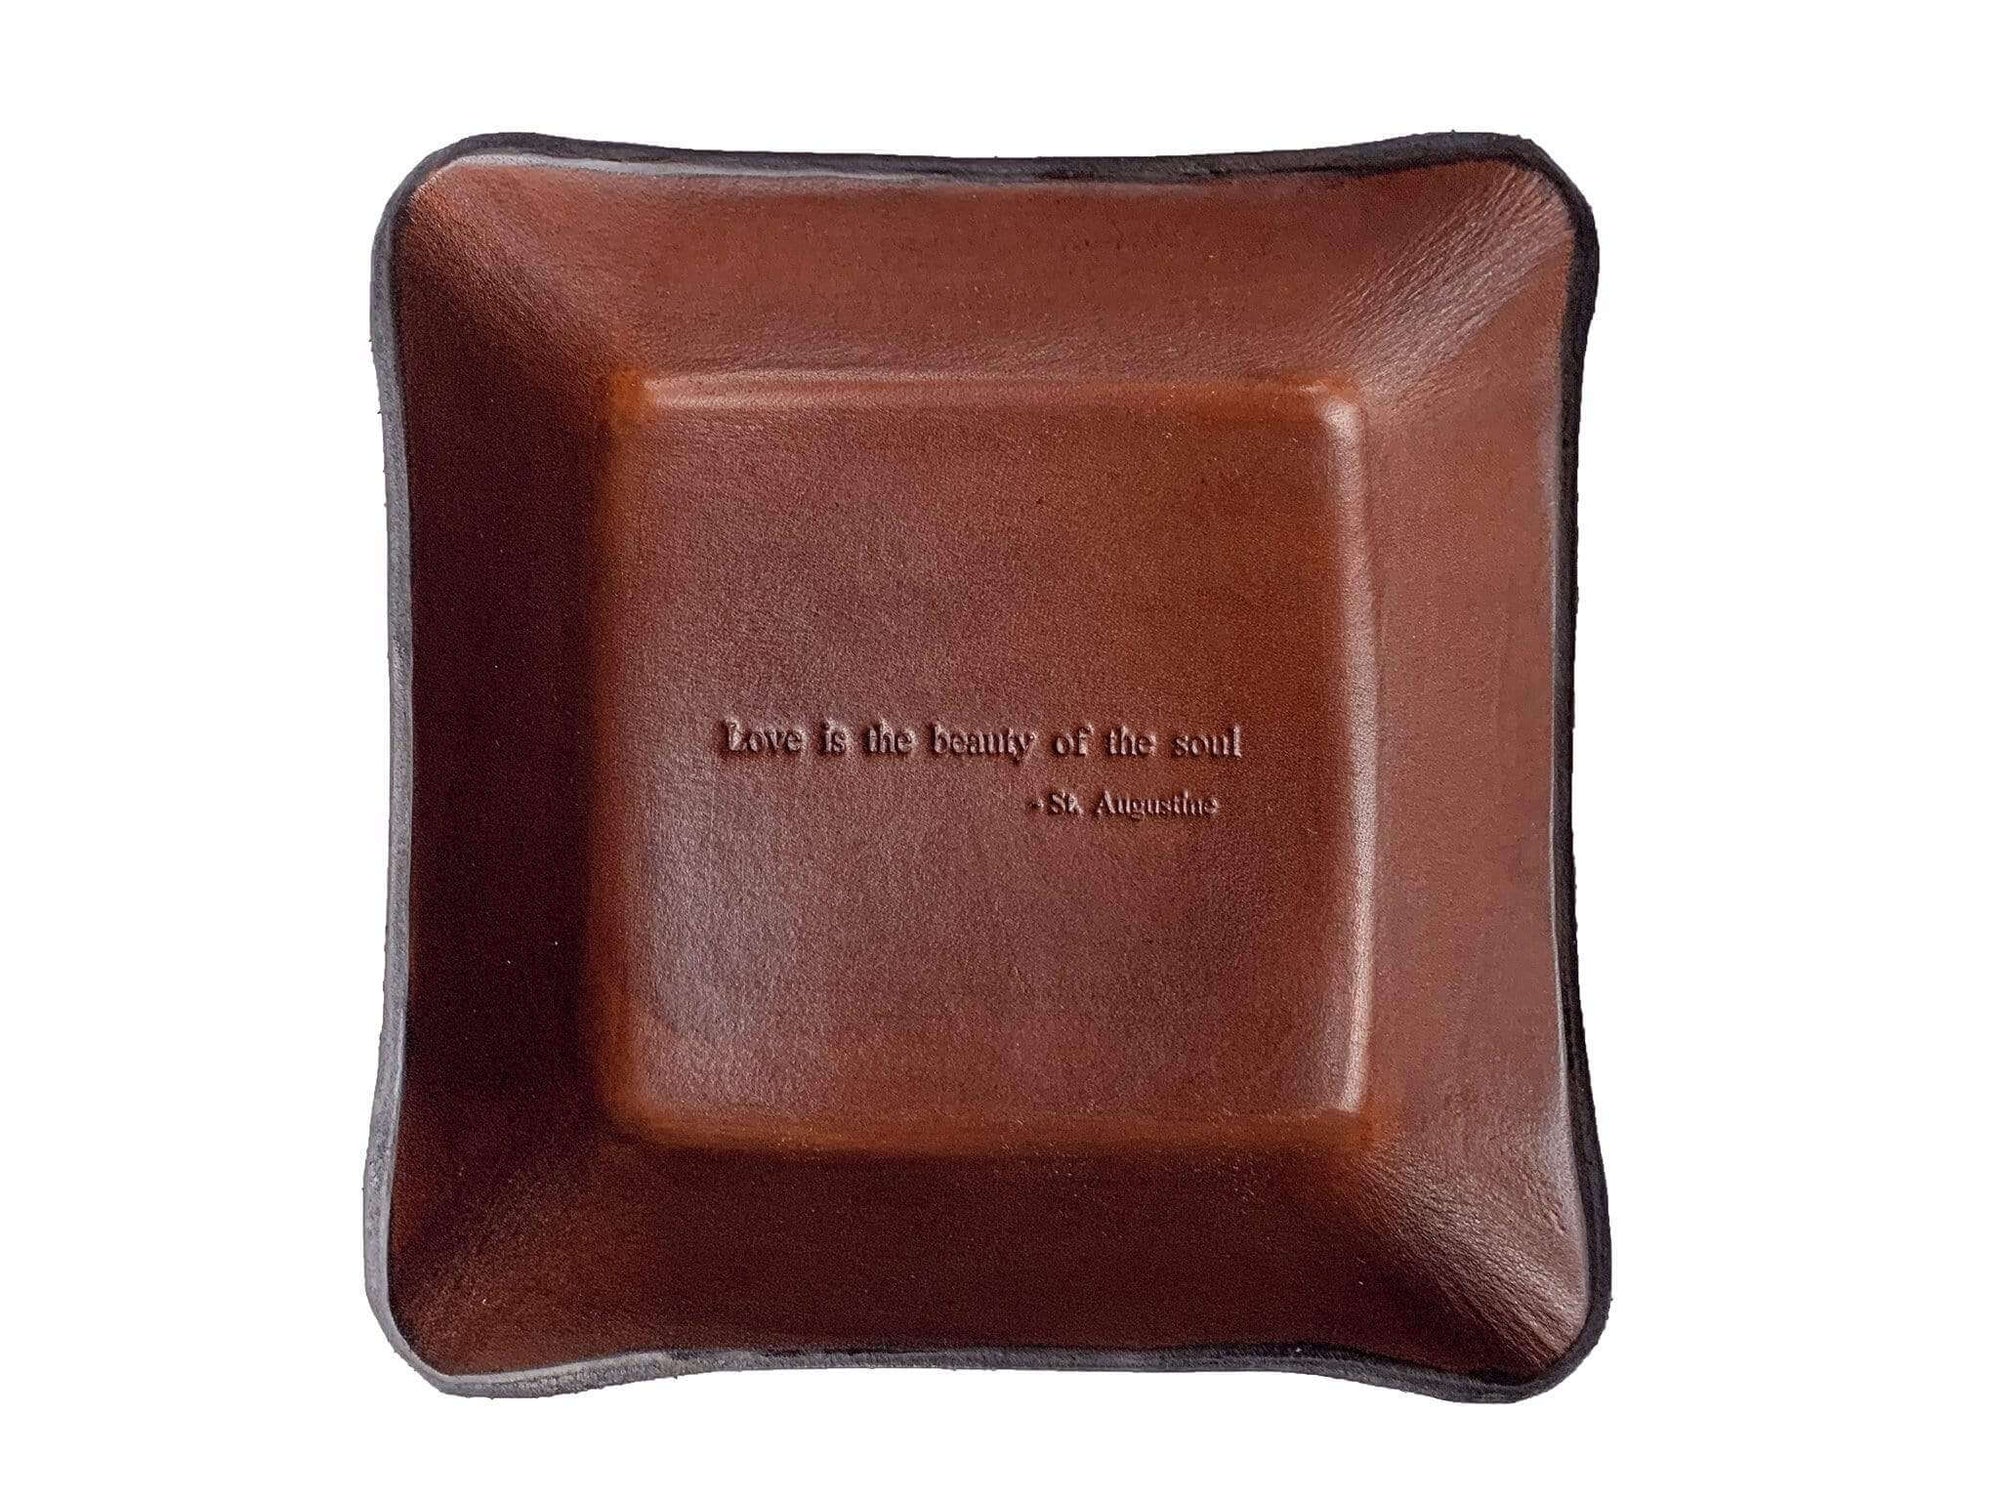 Leather 3rd Anniversary Gift. "Love is the Beauty of the Soul" Tray. Brown.